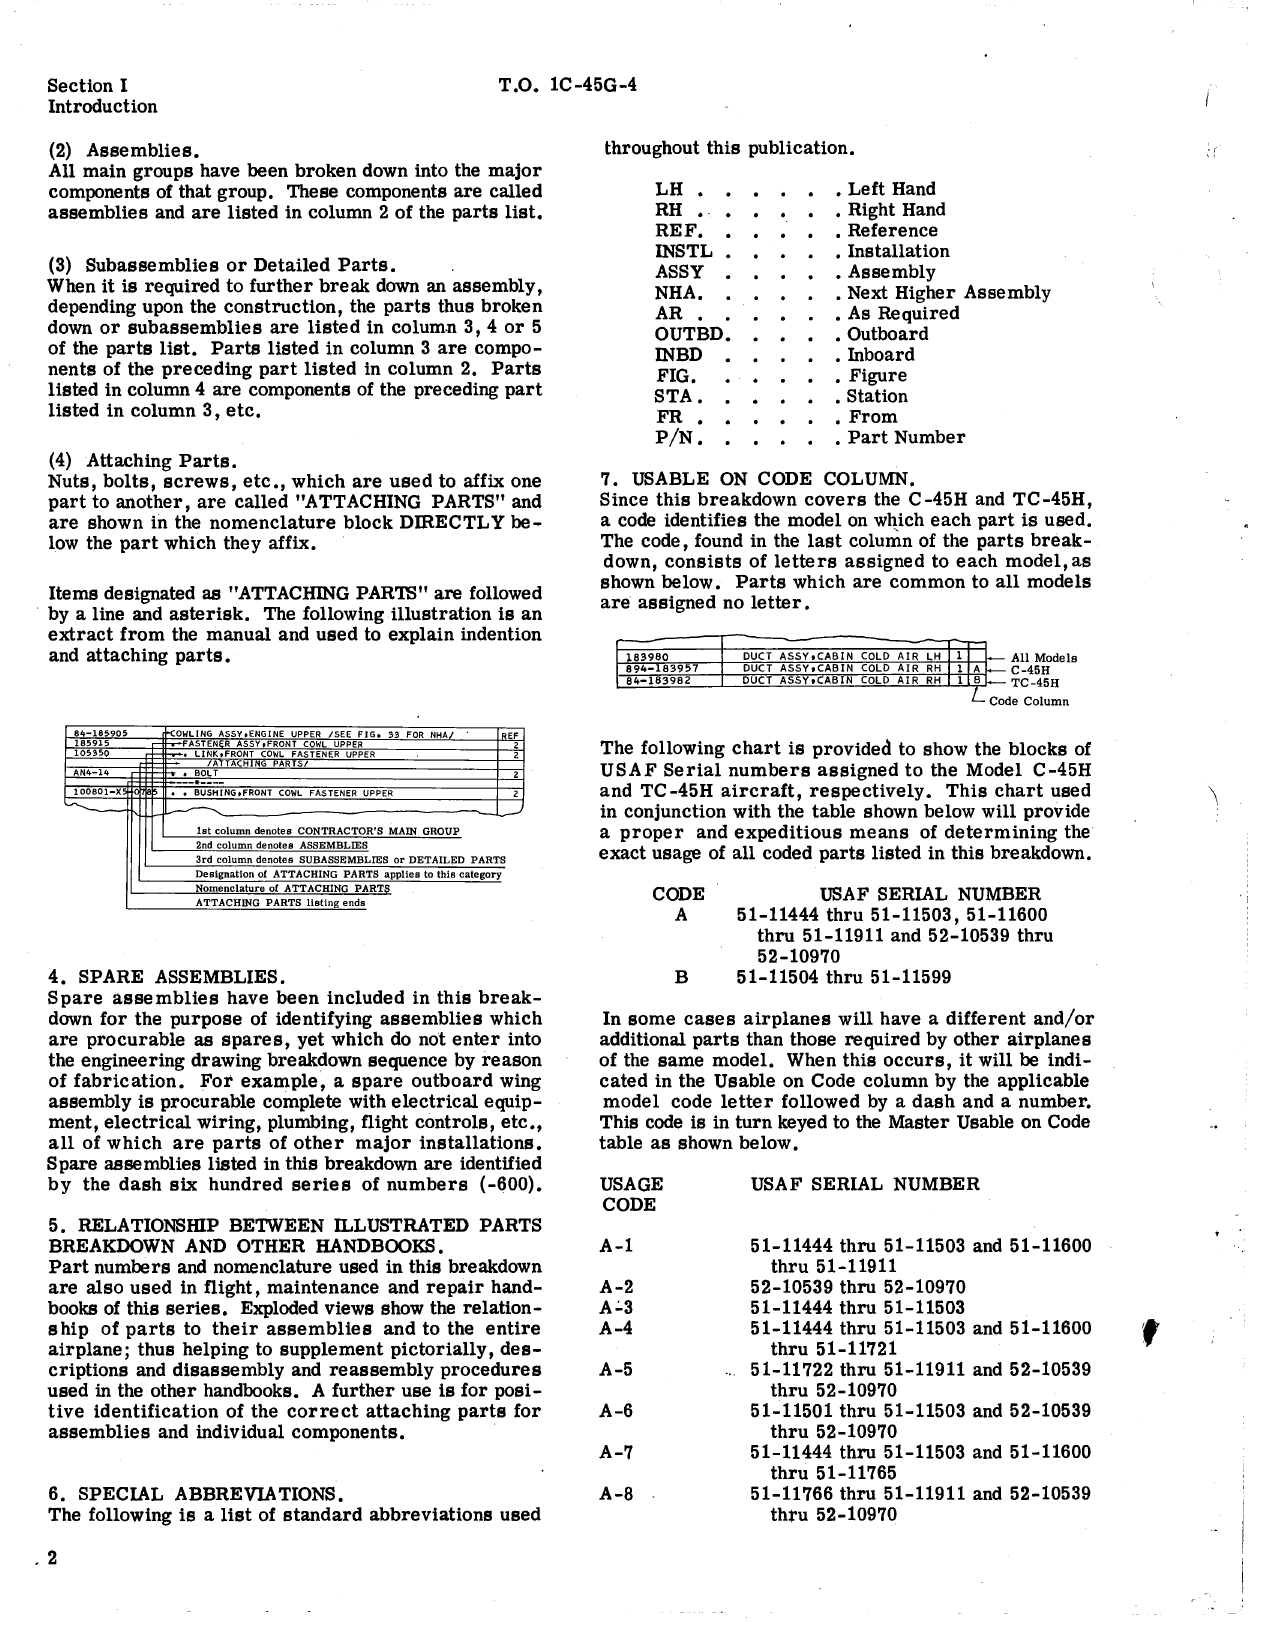 Sample page 8 from AirCorps Library document: Illustrated Parts Breakdown for C-45H and TC-45H Aircraft